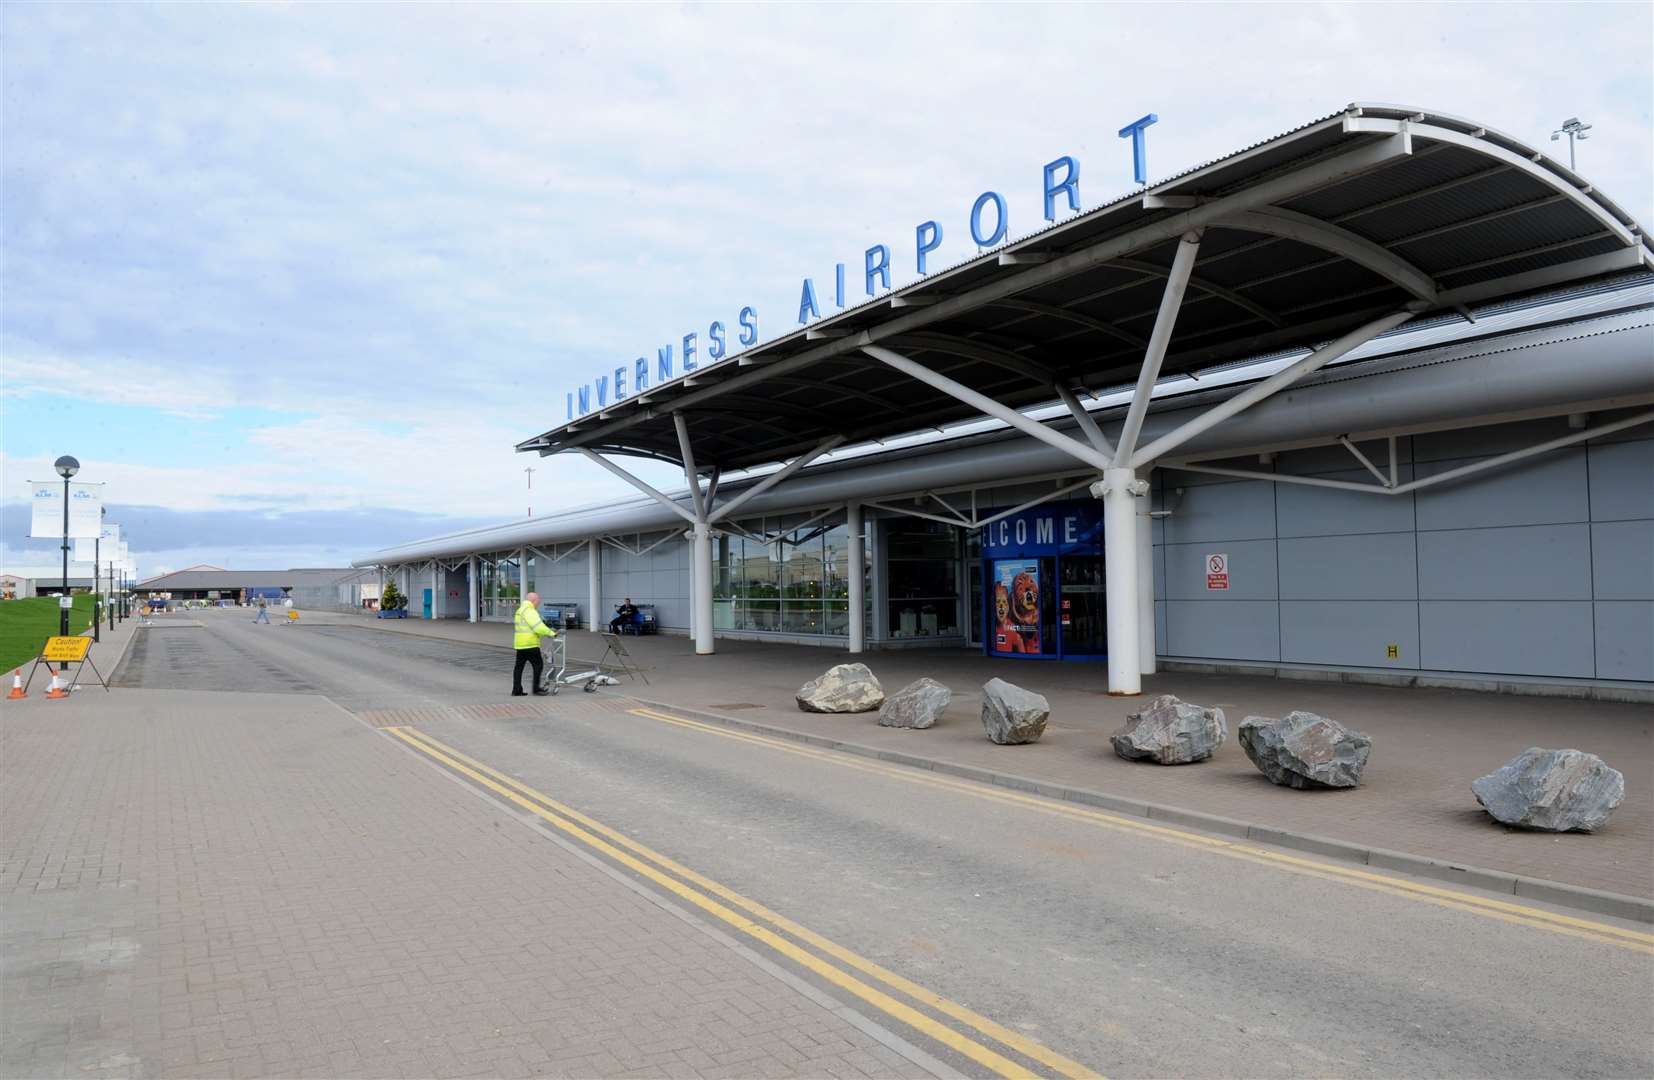 Passengers at Inverness Airport are experiencing flight disruptions due to a a technical issue which has hit UK air traffic control systems.